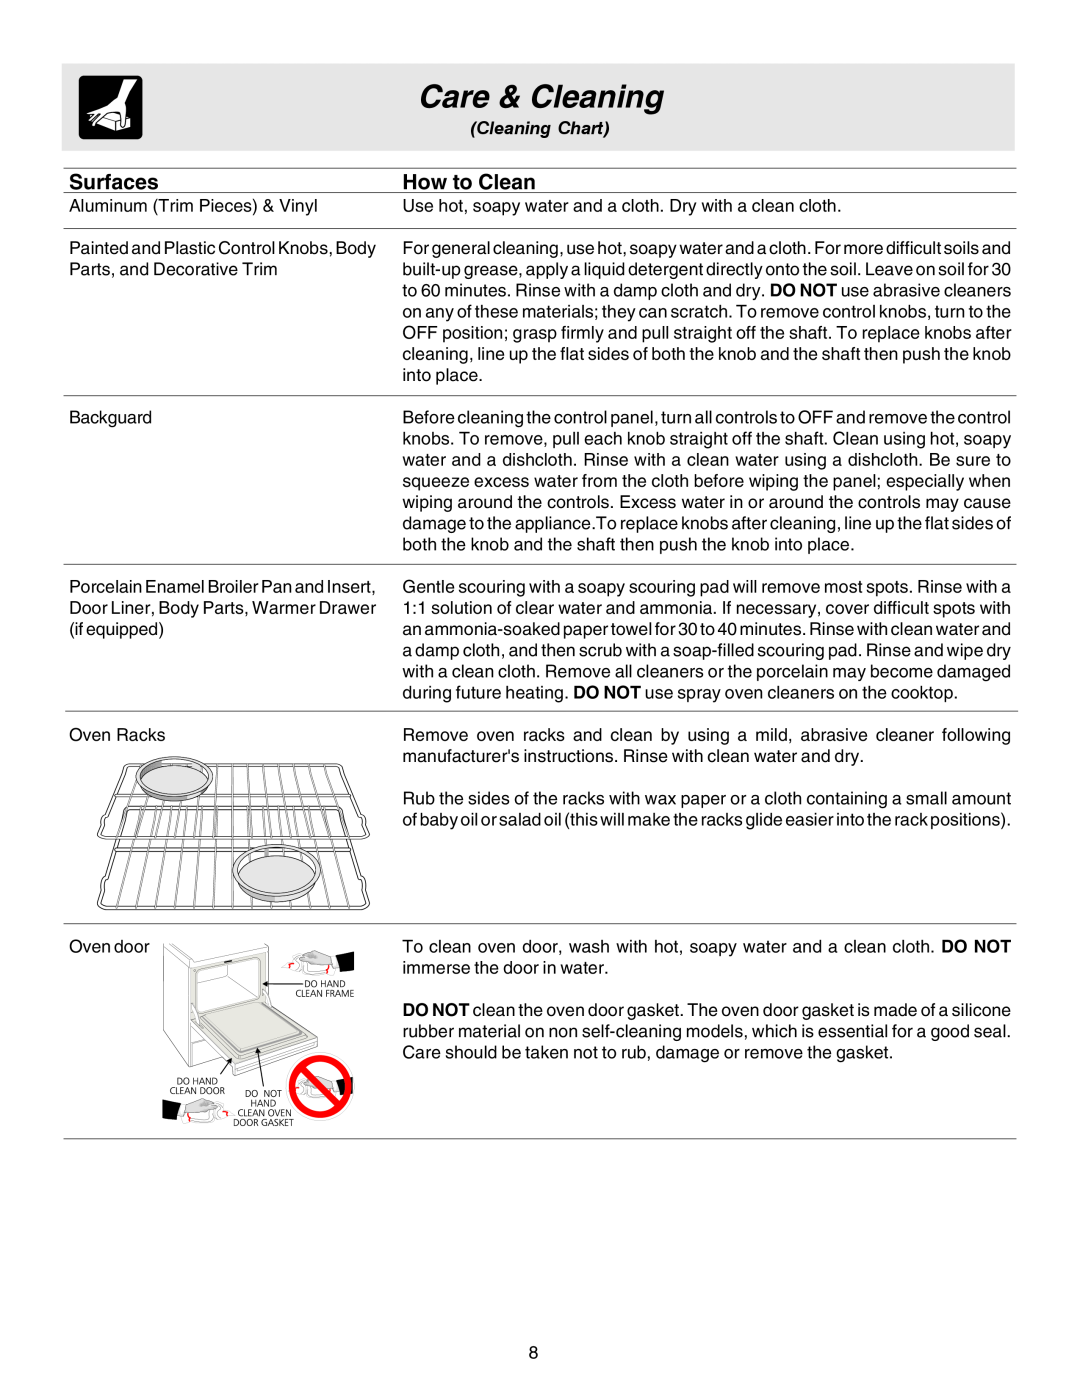 White-Westinghouse 316257134 (0809) important safety instructions Care & Cleaning, Surfaces, How to Clean, Cleaning Chart 